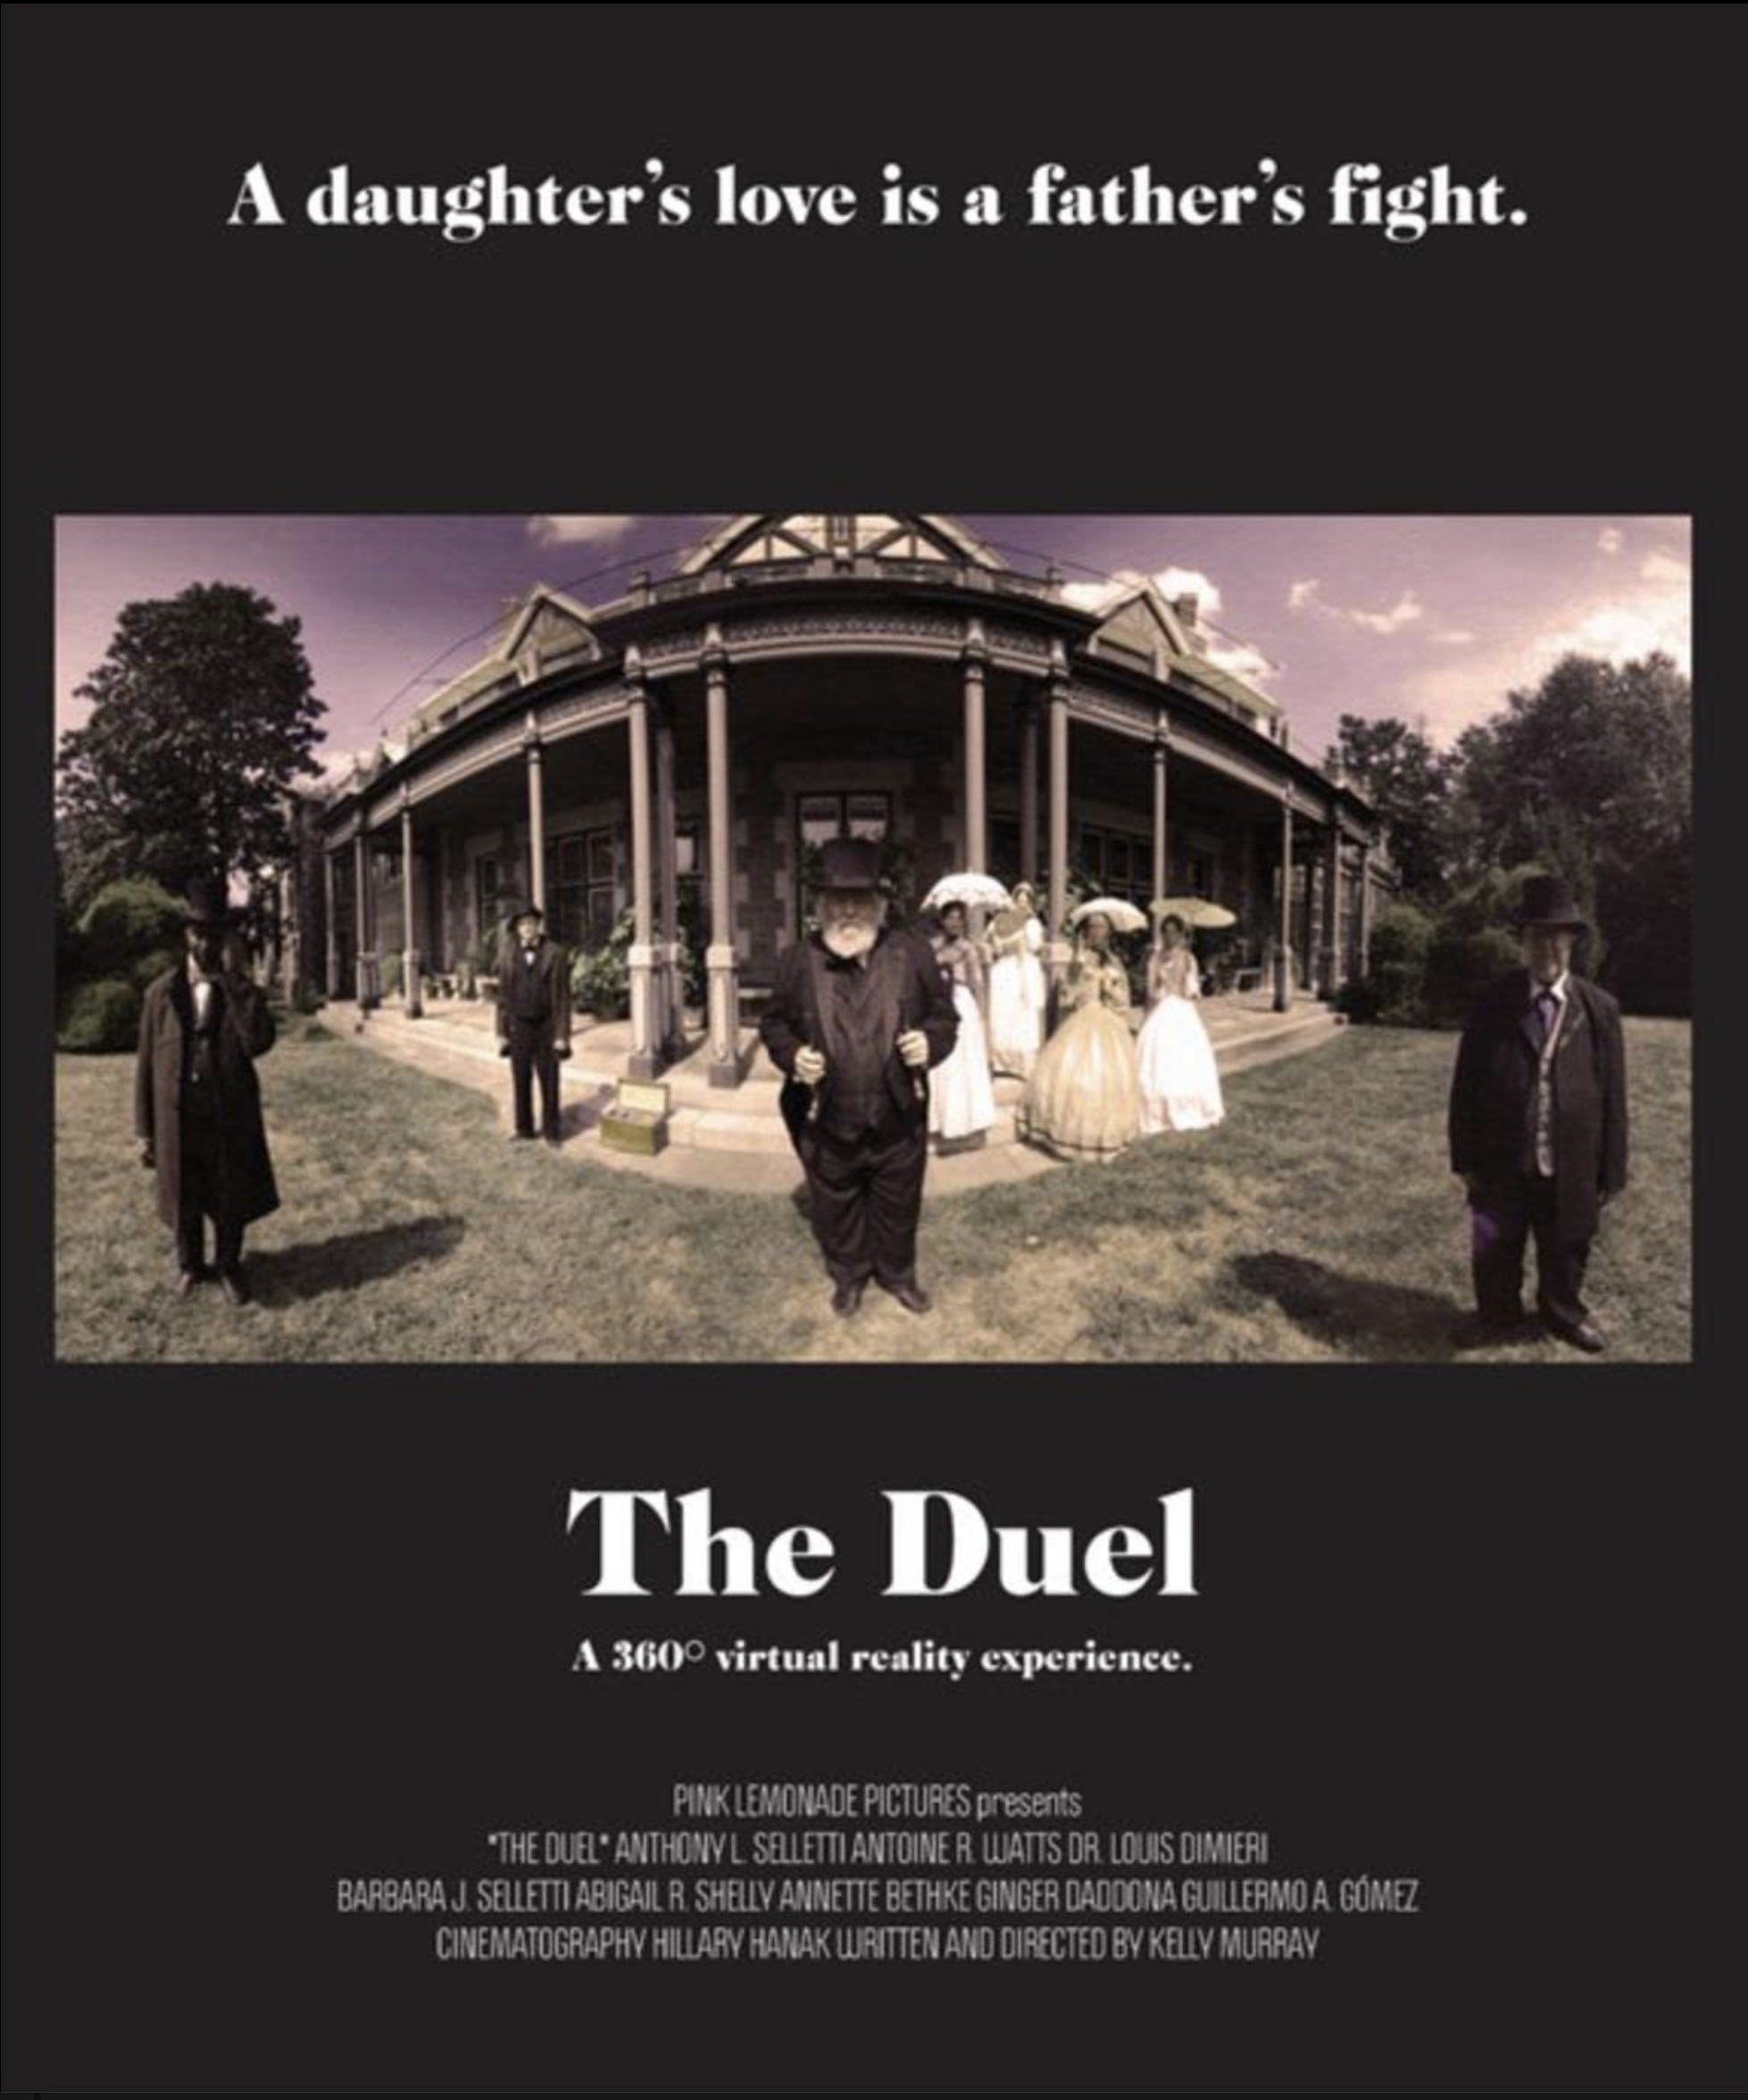 The Duel (360 VR Film)